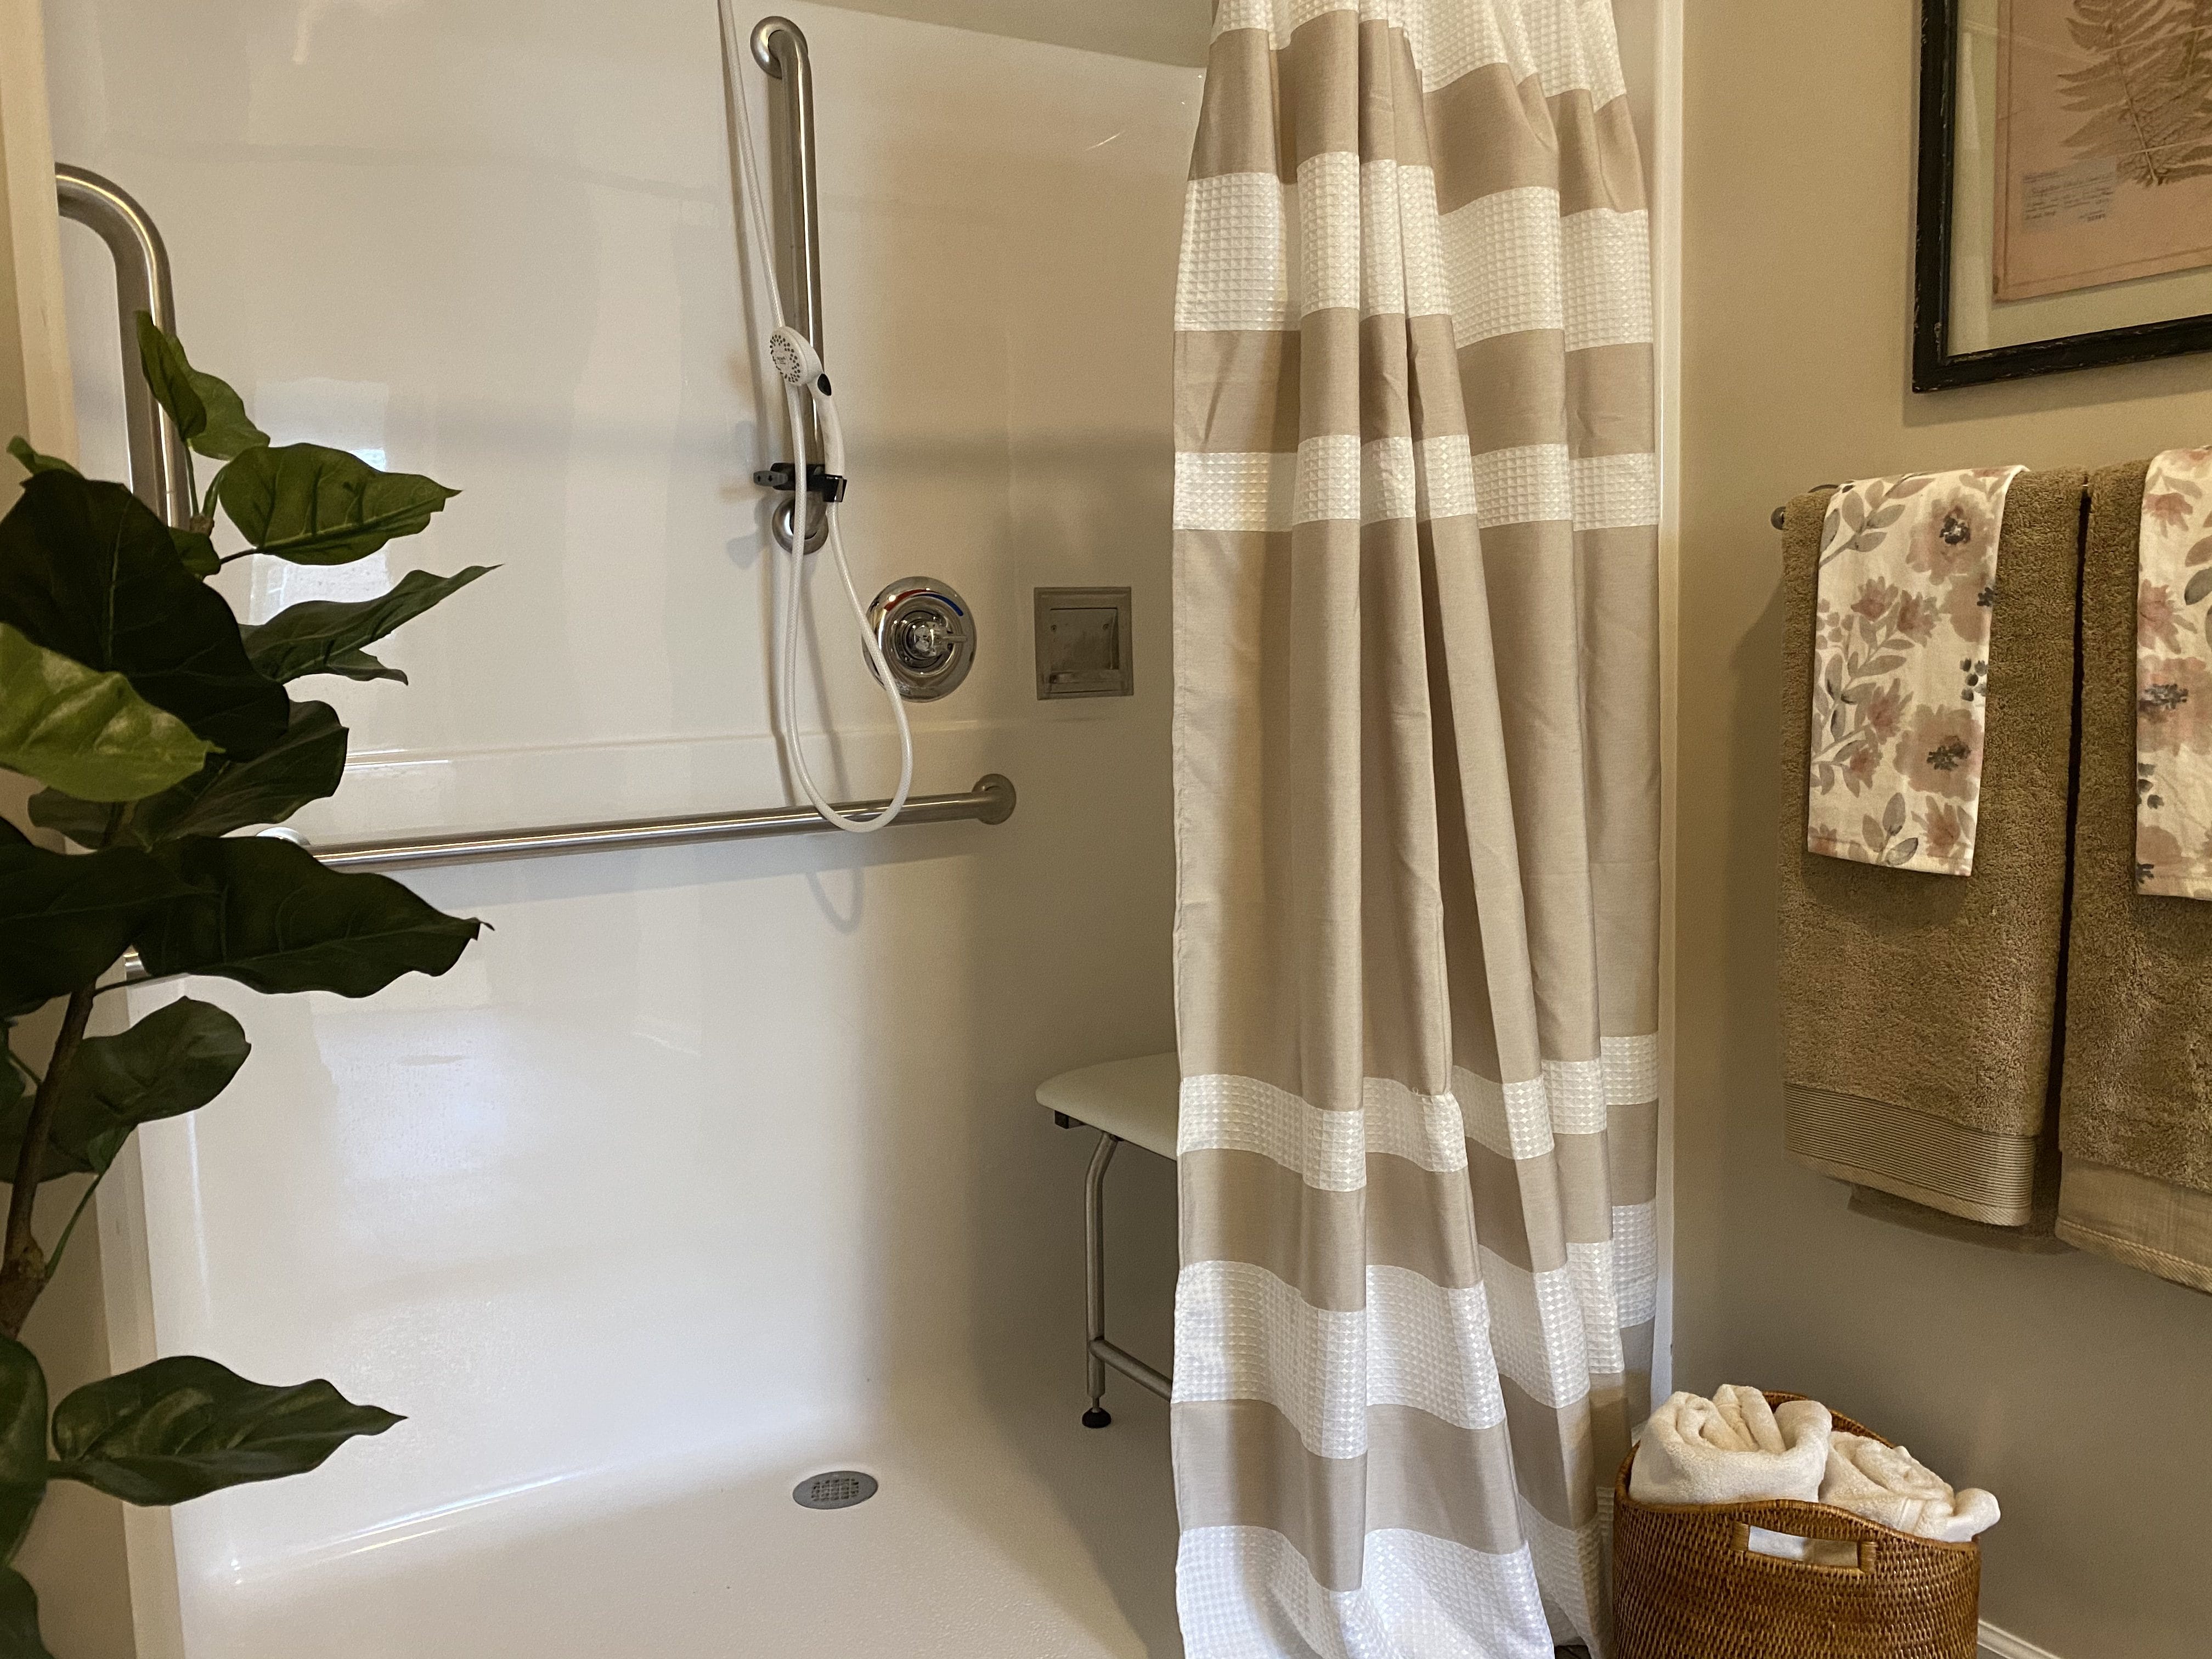 <span  class="uc_style_uc_tiles_grid_image_elementor_uc_items_attribute_title" style="color:#000000;">Shower in the Aster Place independent living apartments.</span>